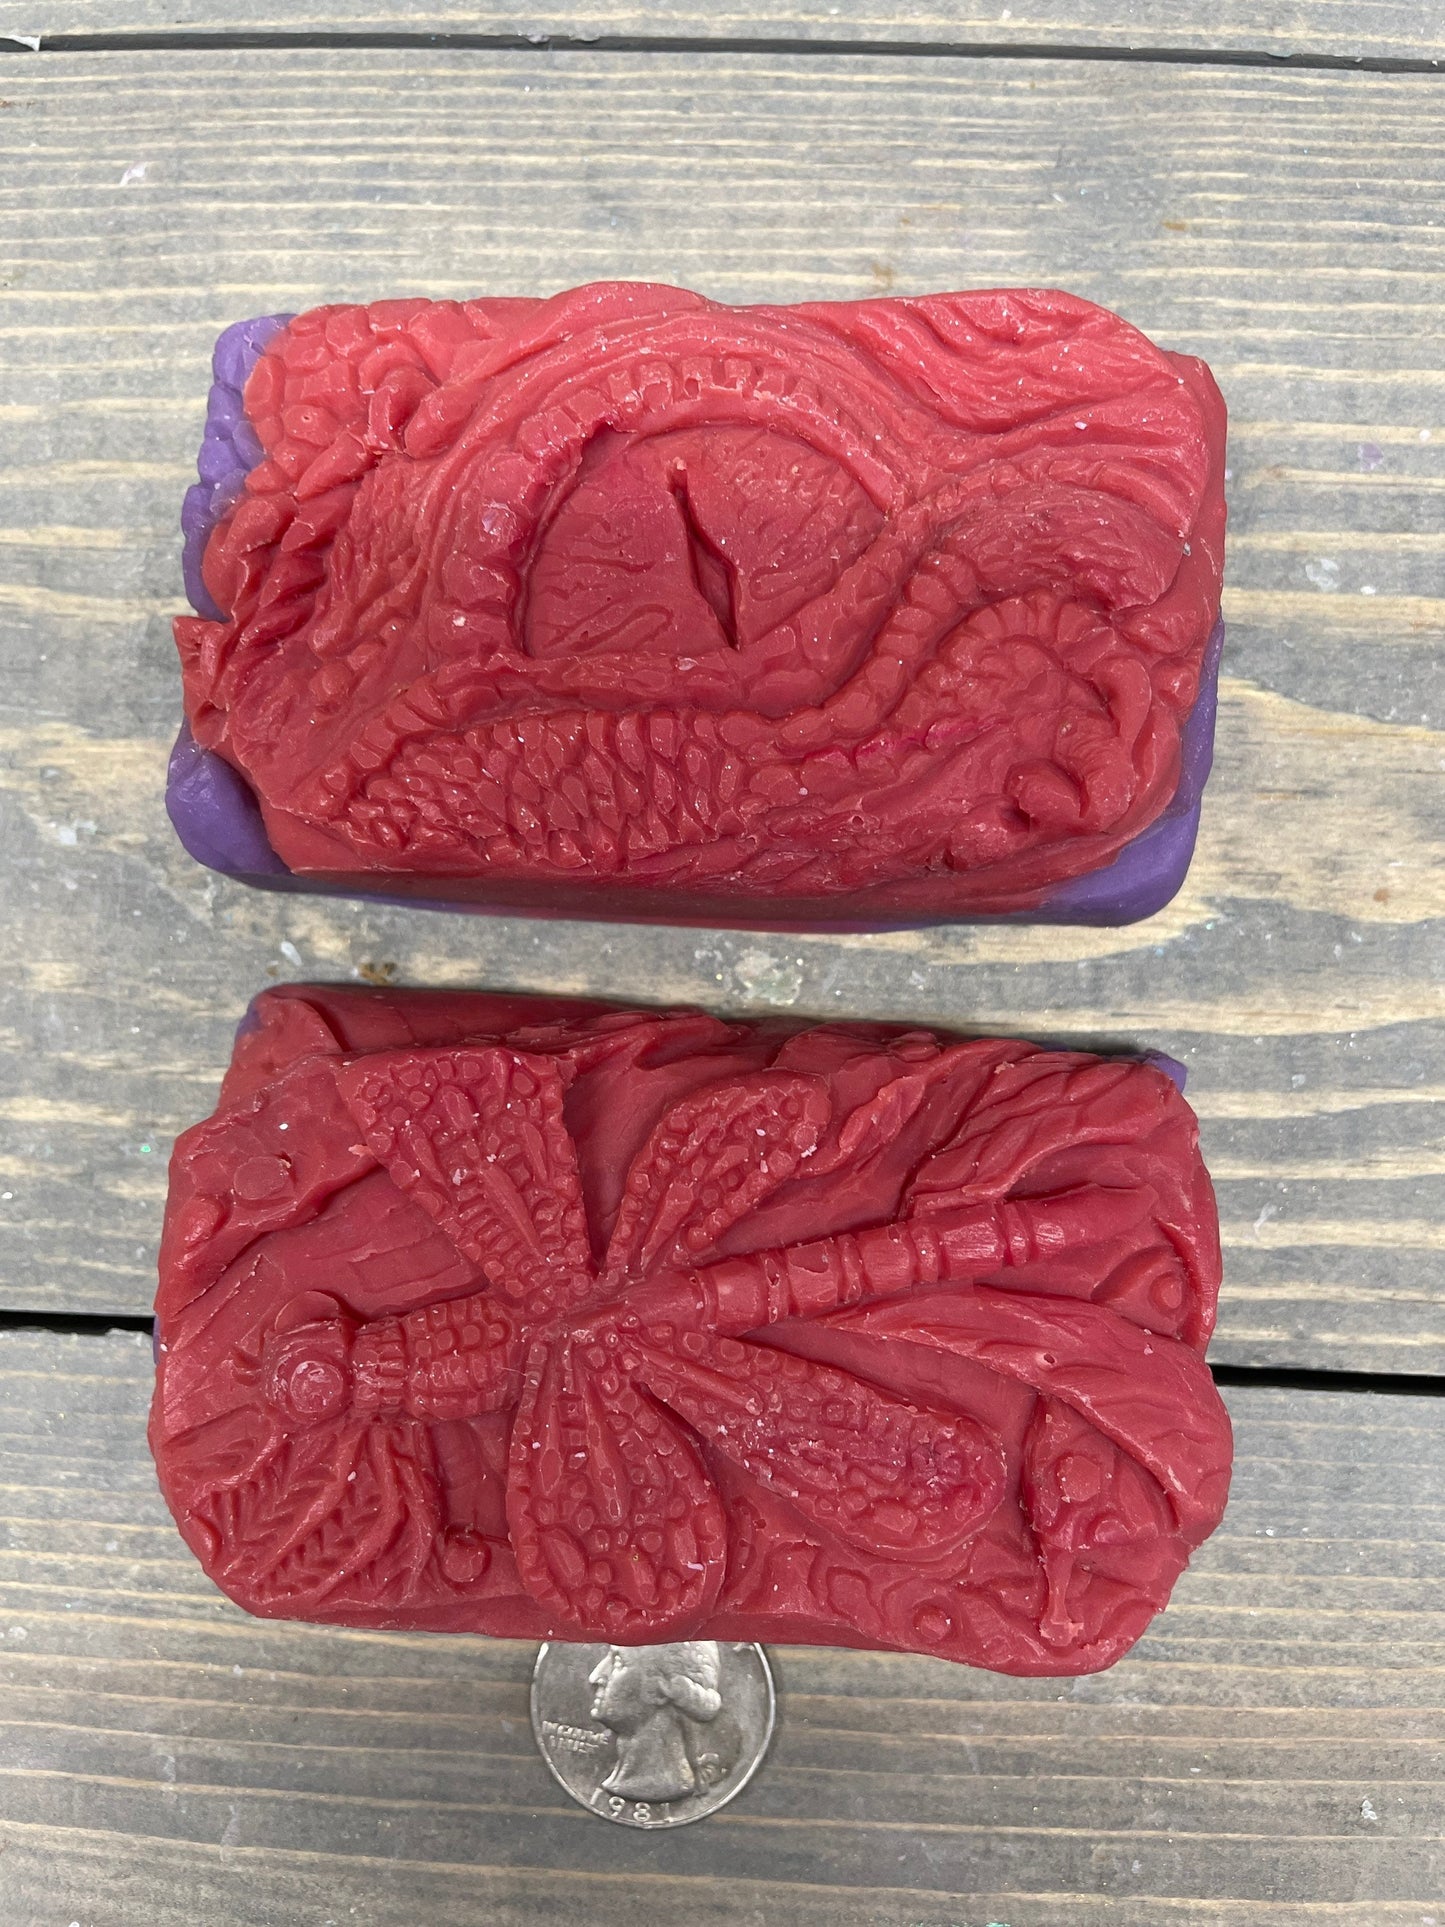 A photo showing detail of the Dragon Eye and Dragonfly Soap bars